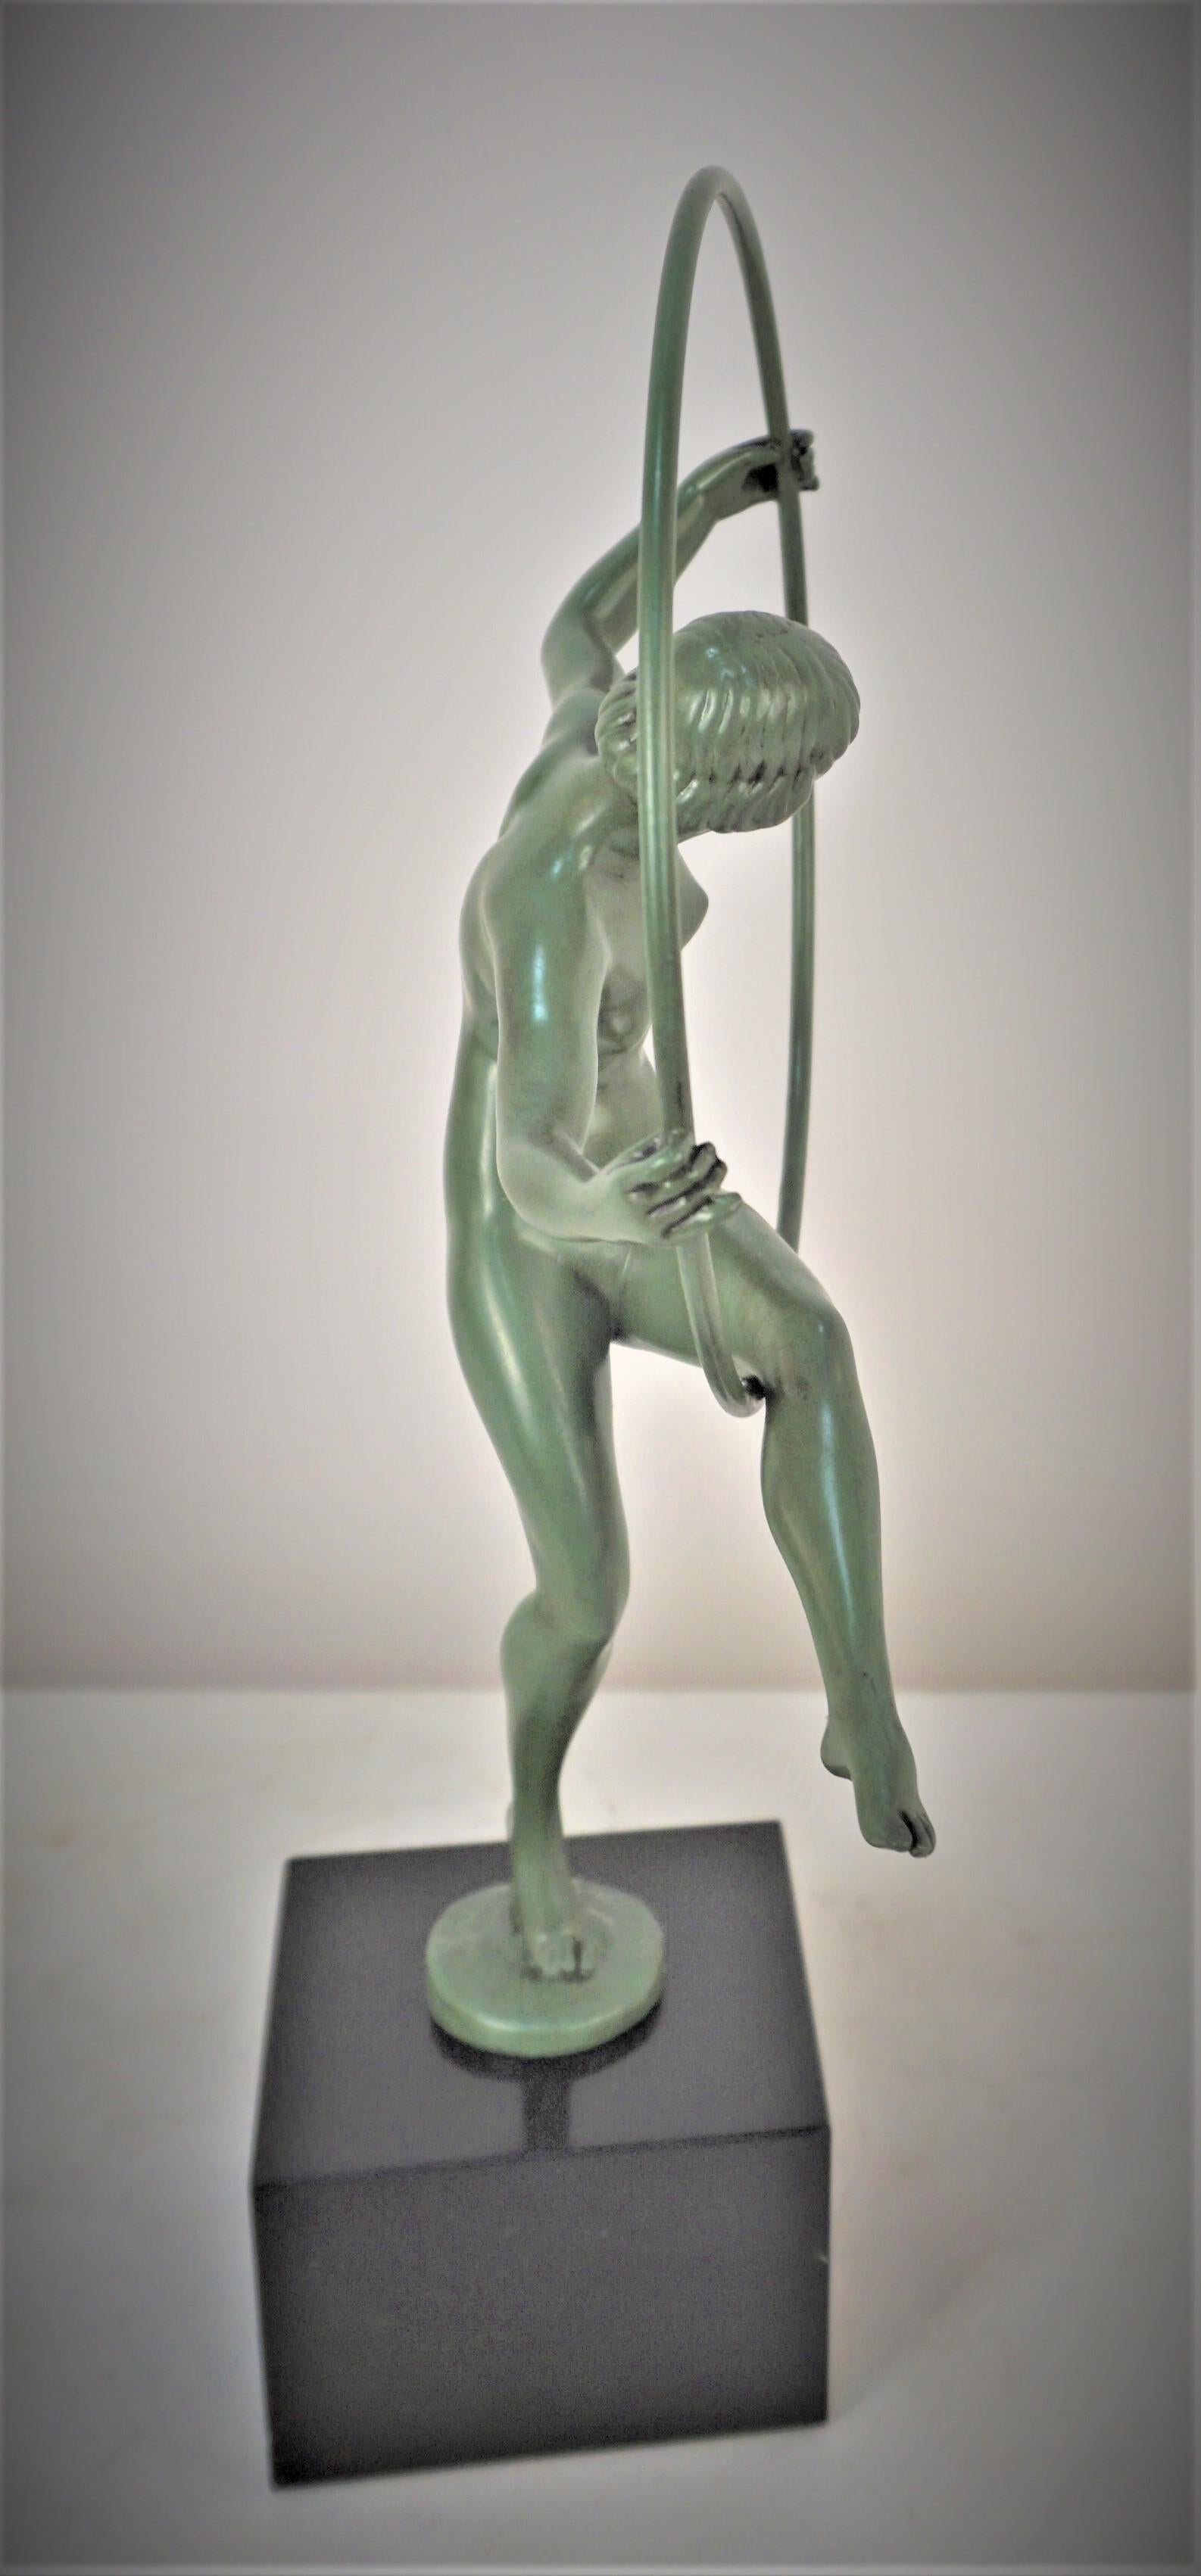 French 1930's Art Deco Sculpture Hoop Dancer Briand, Marcel Andre Bouraine In Good Condition For Sale In Fairfax, VA